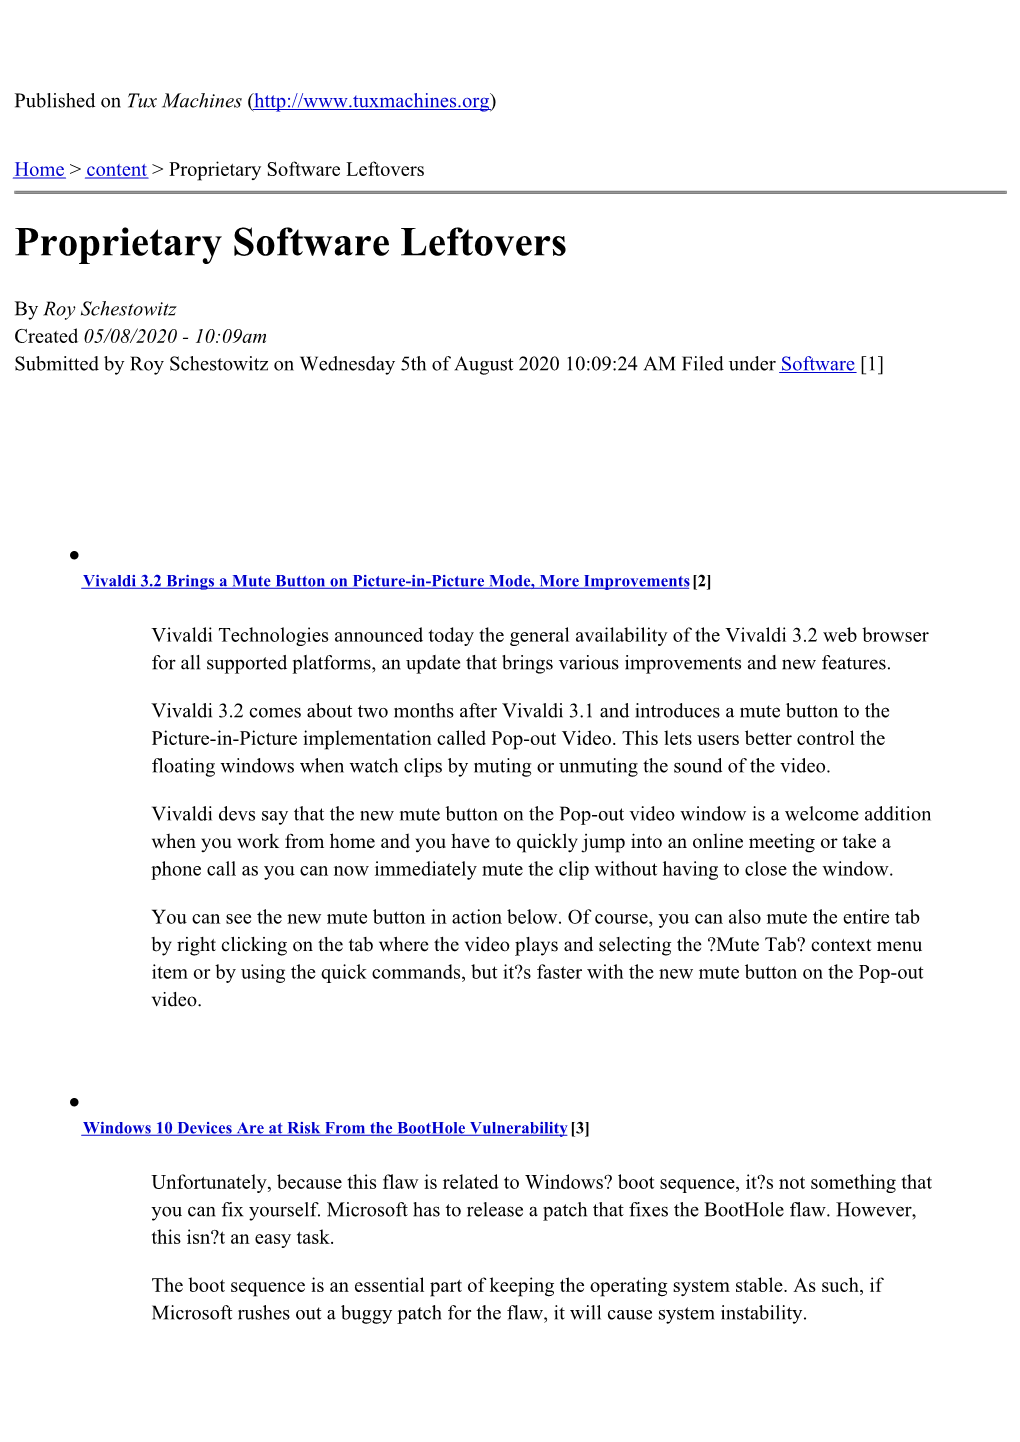 Proprietary Software Leftovers